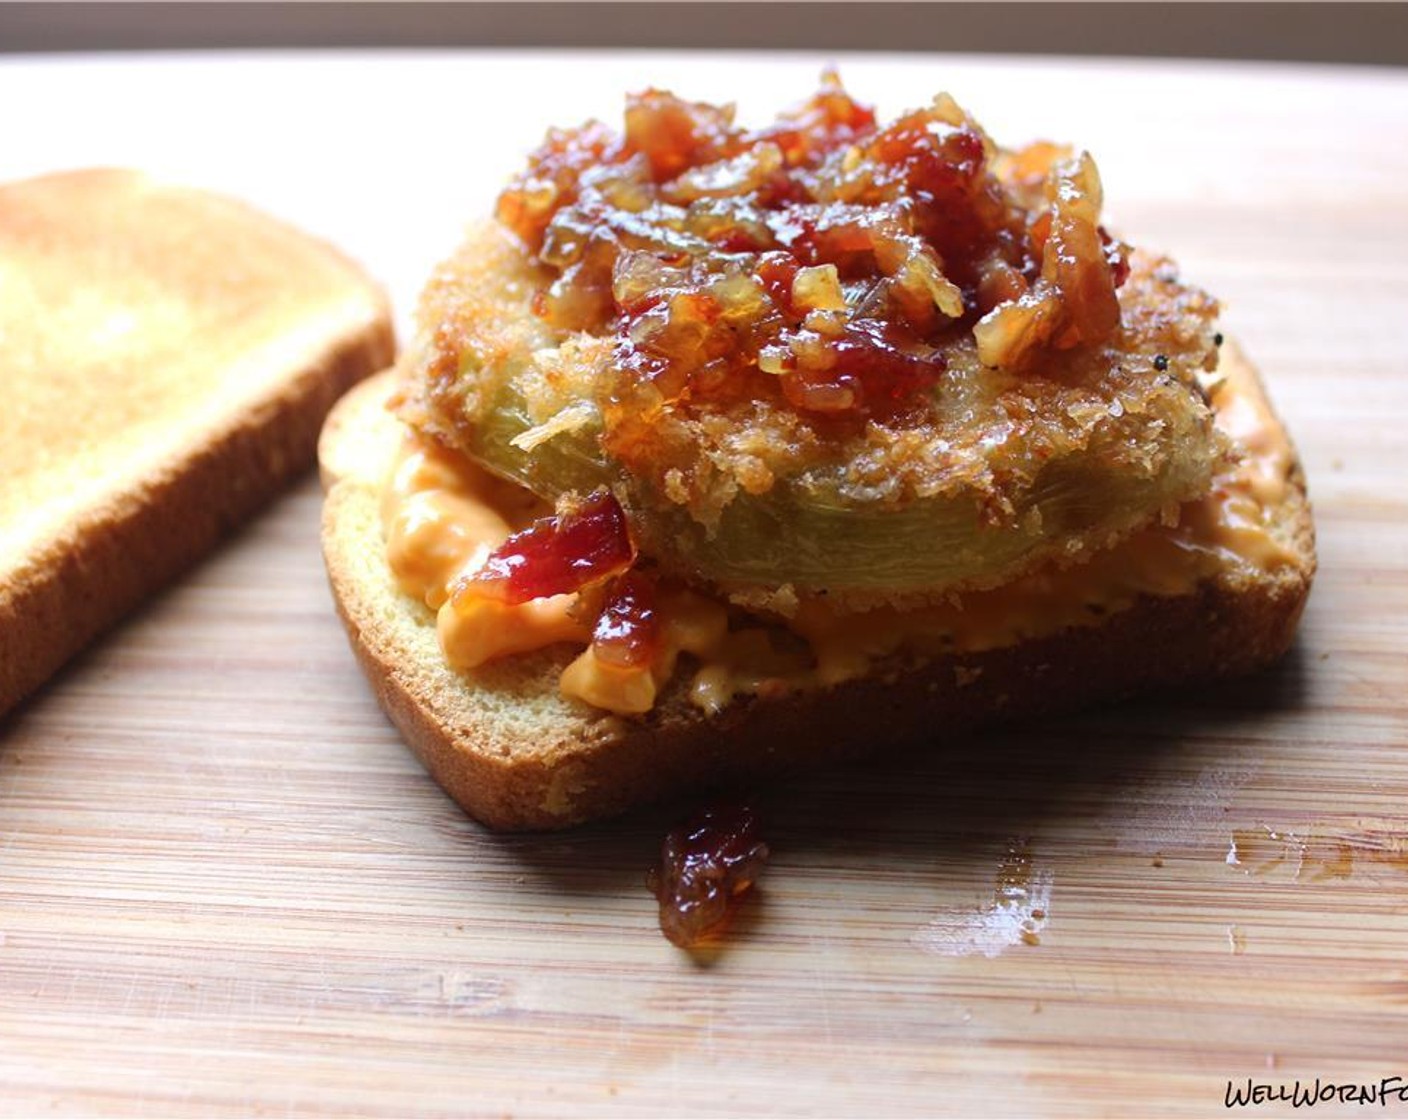 step 11 Spread about 2 tablespoons of Pimento Cheese (3/4 cup) on one slice of Potato Bread (12 slices). Top with a fried green tomatoes. Top that with a tablespoon of bacon jam and finish with another slice of potato bread.